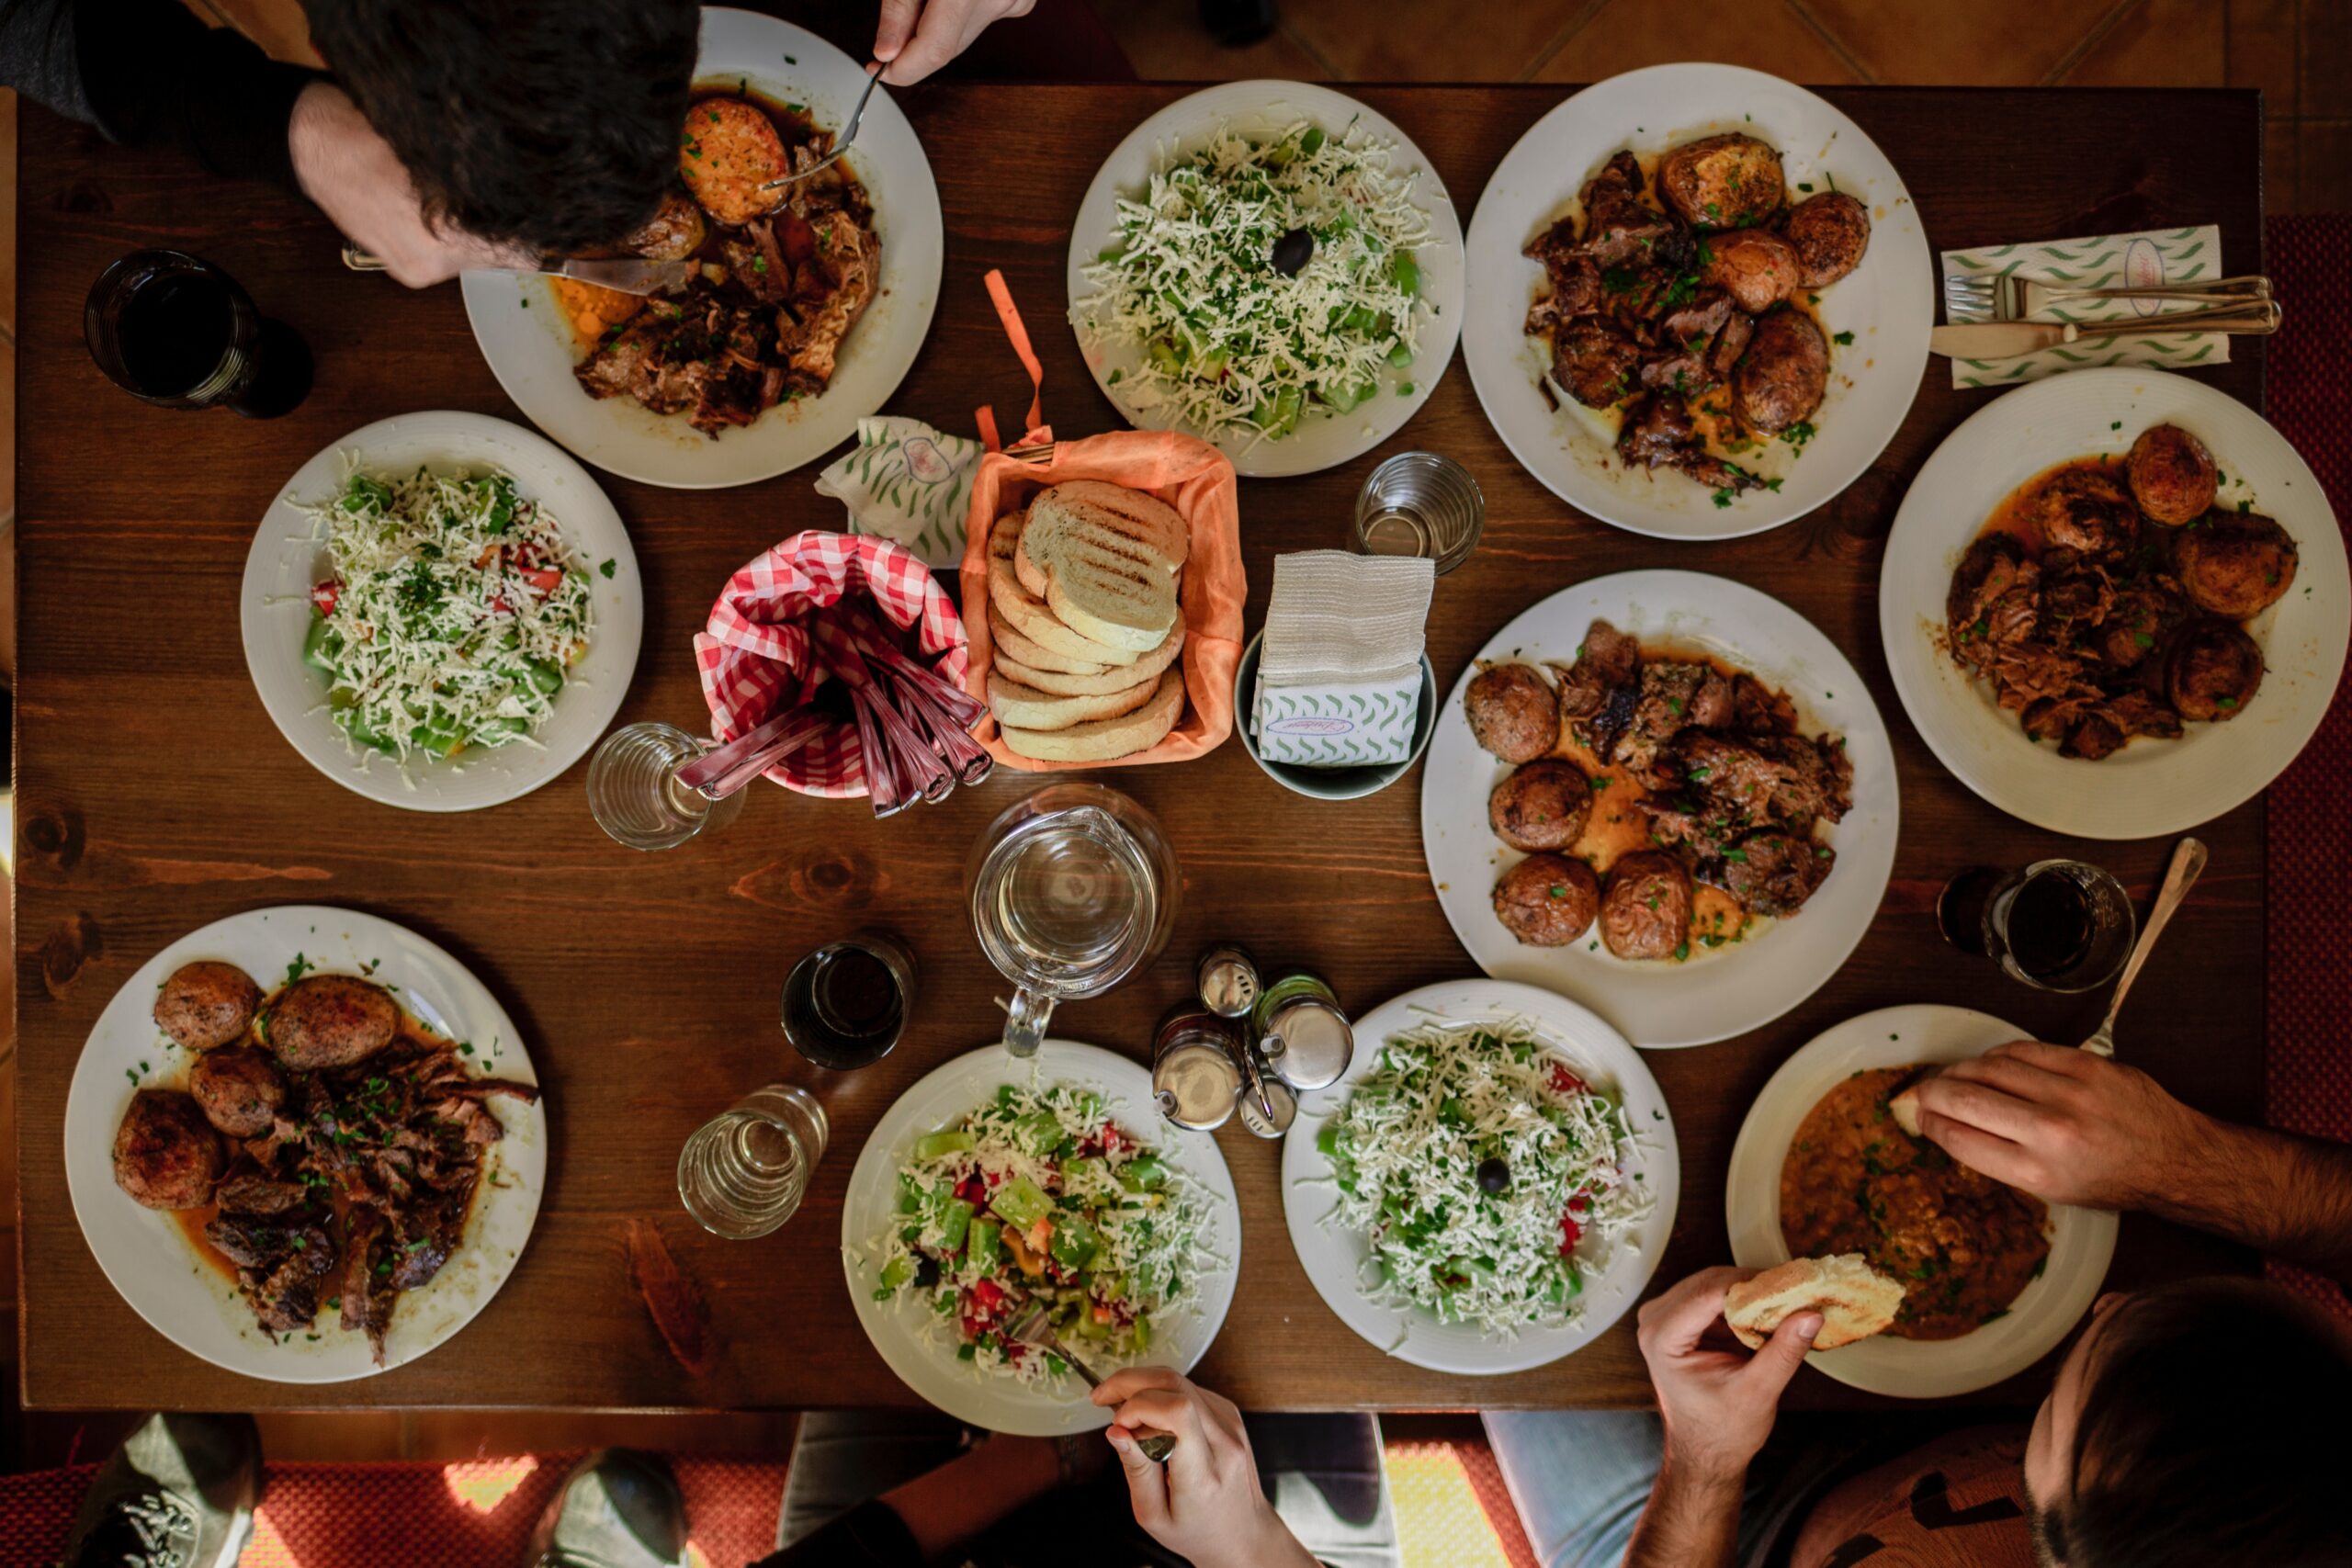 This is a photo from above a dinner table. The table has many large plates, filled with food.